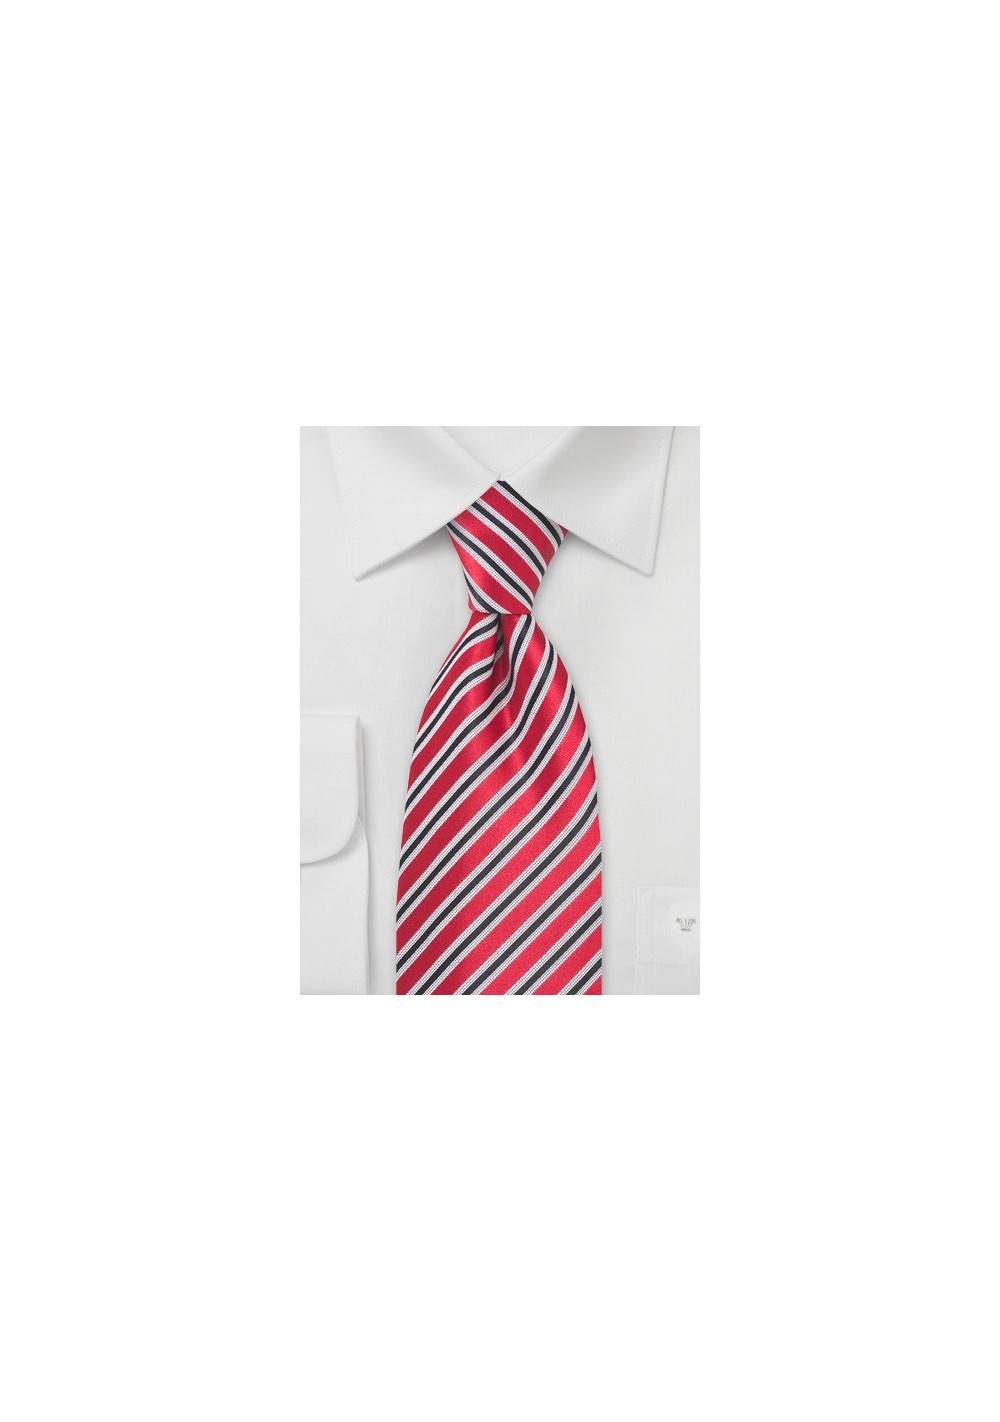 Cherry Red and Black Striped Tie